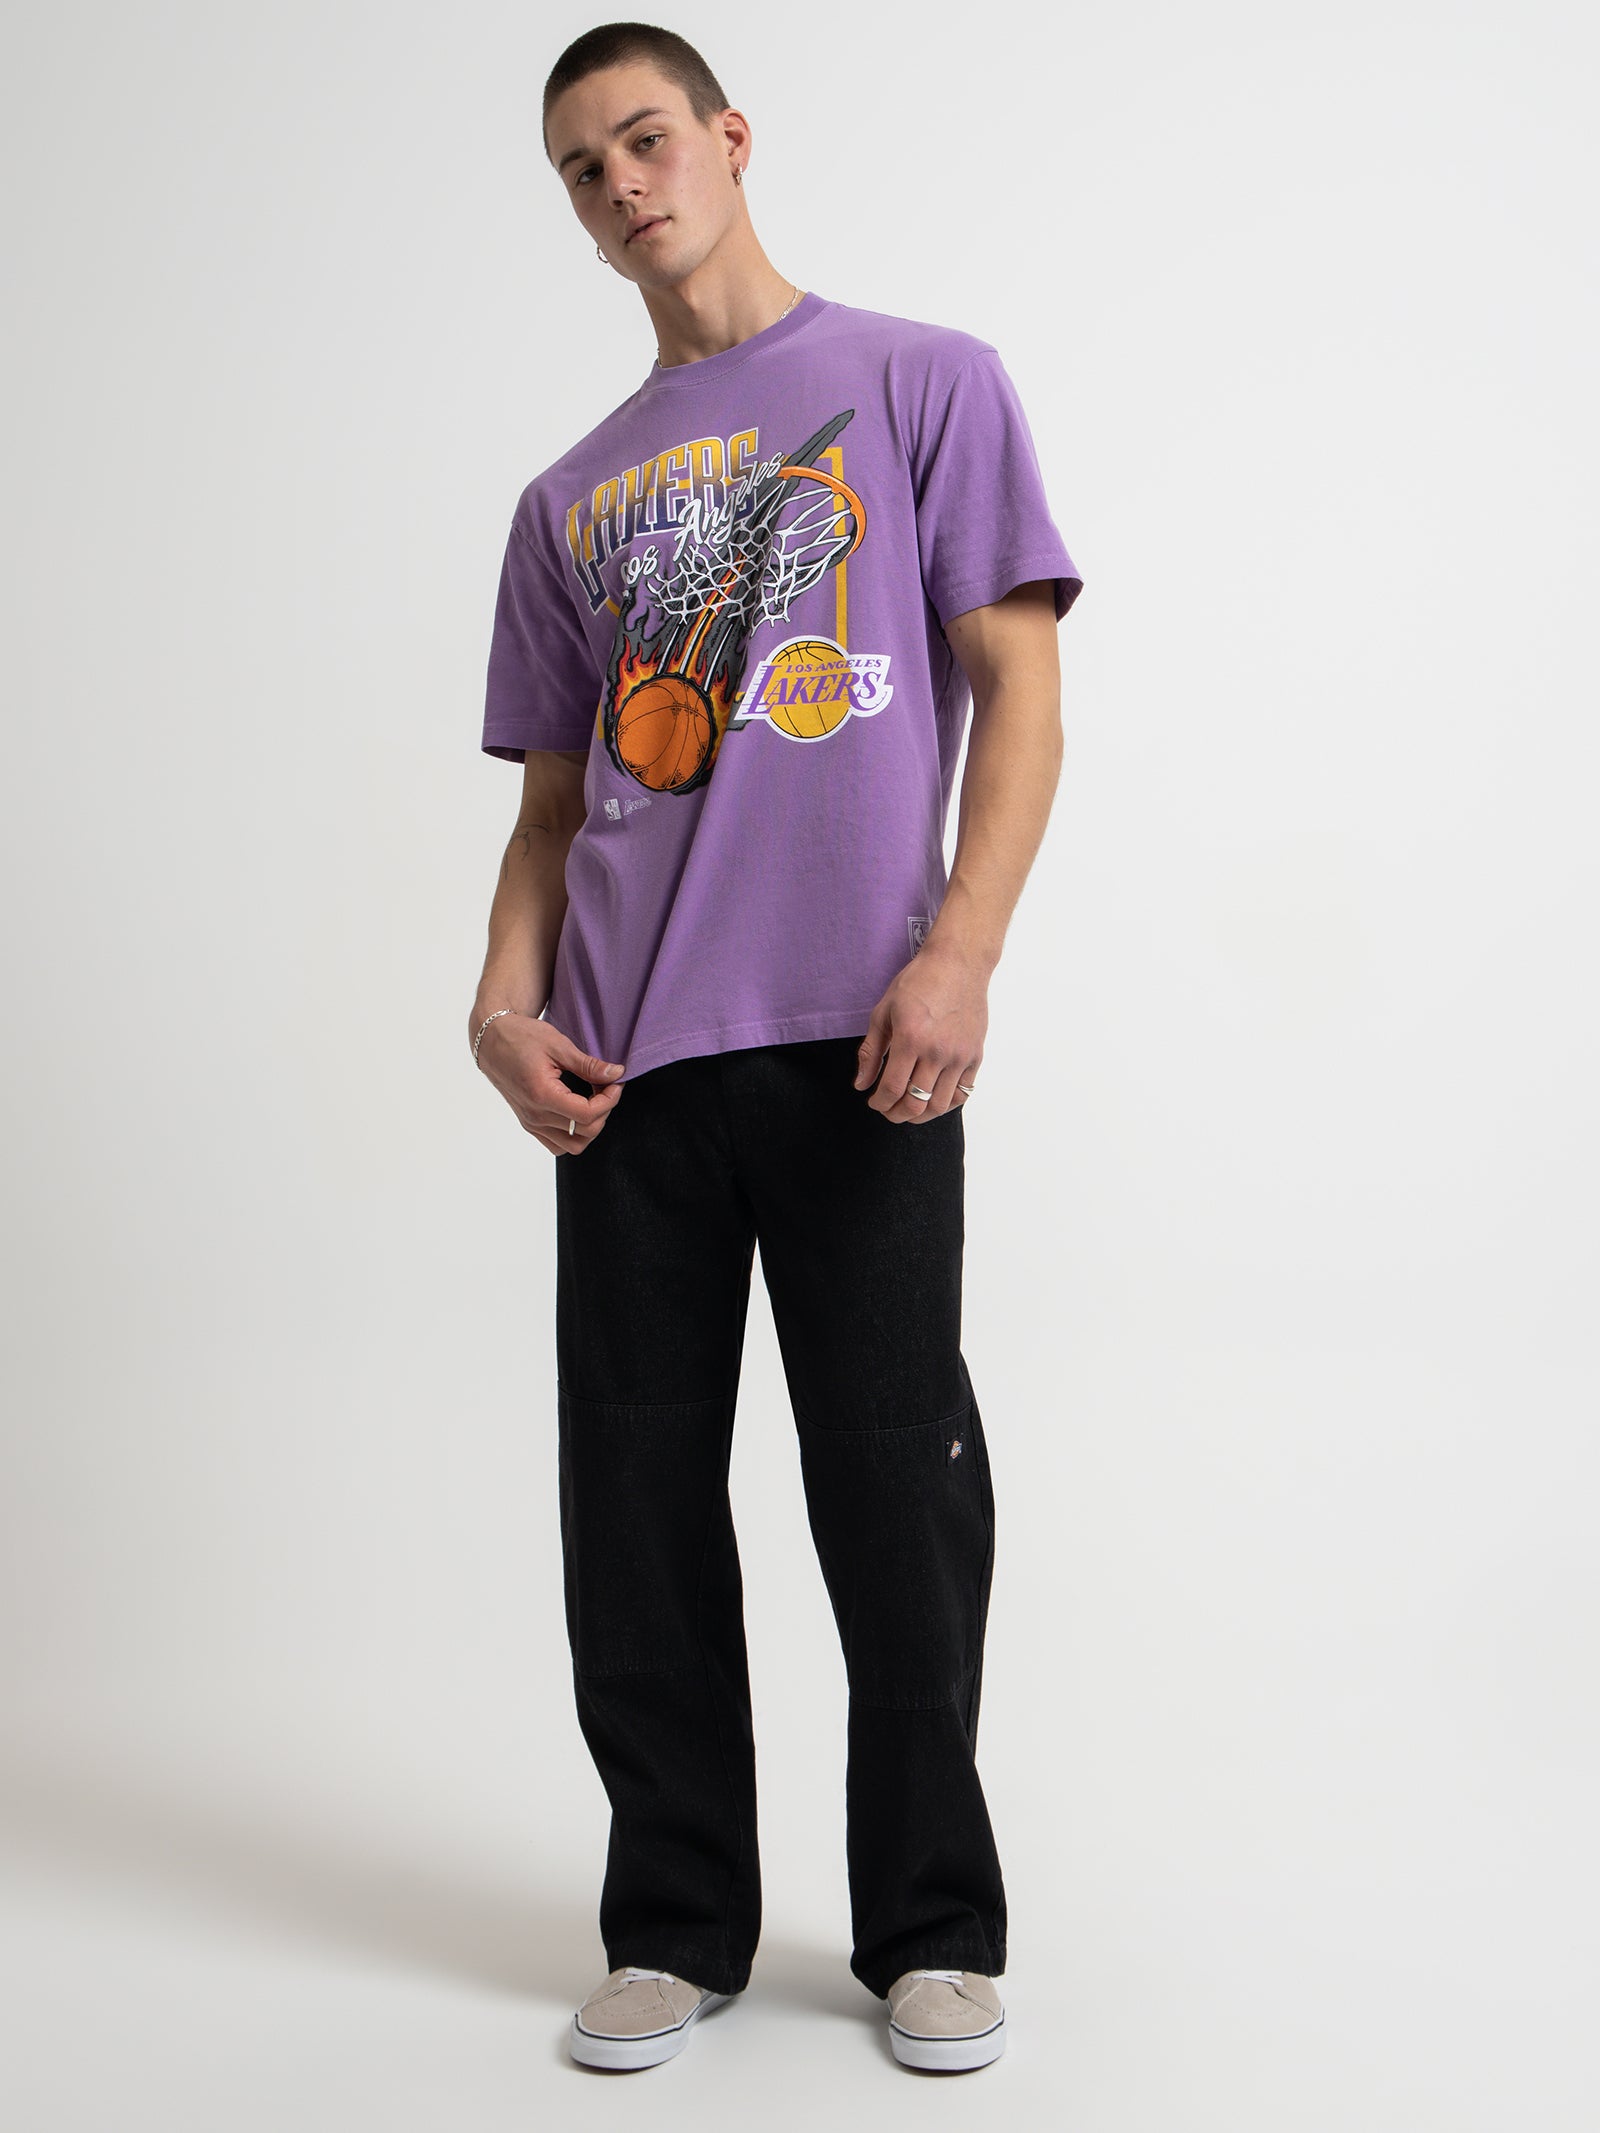 Los Angeles Lakers Fireball T-Shirt in Purple - Glue Store